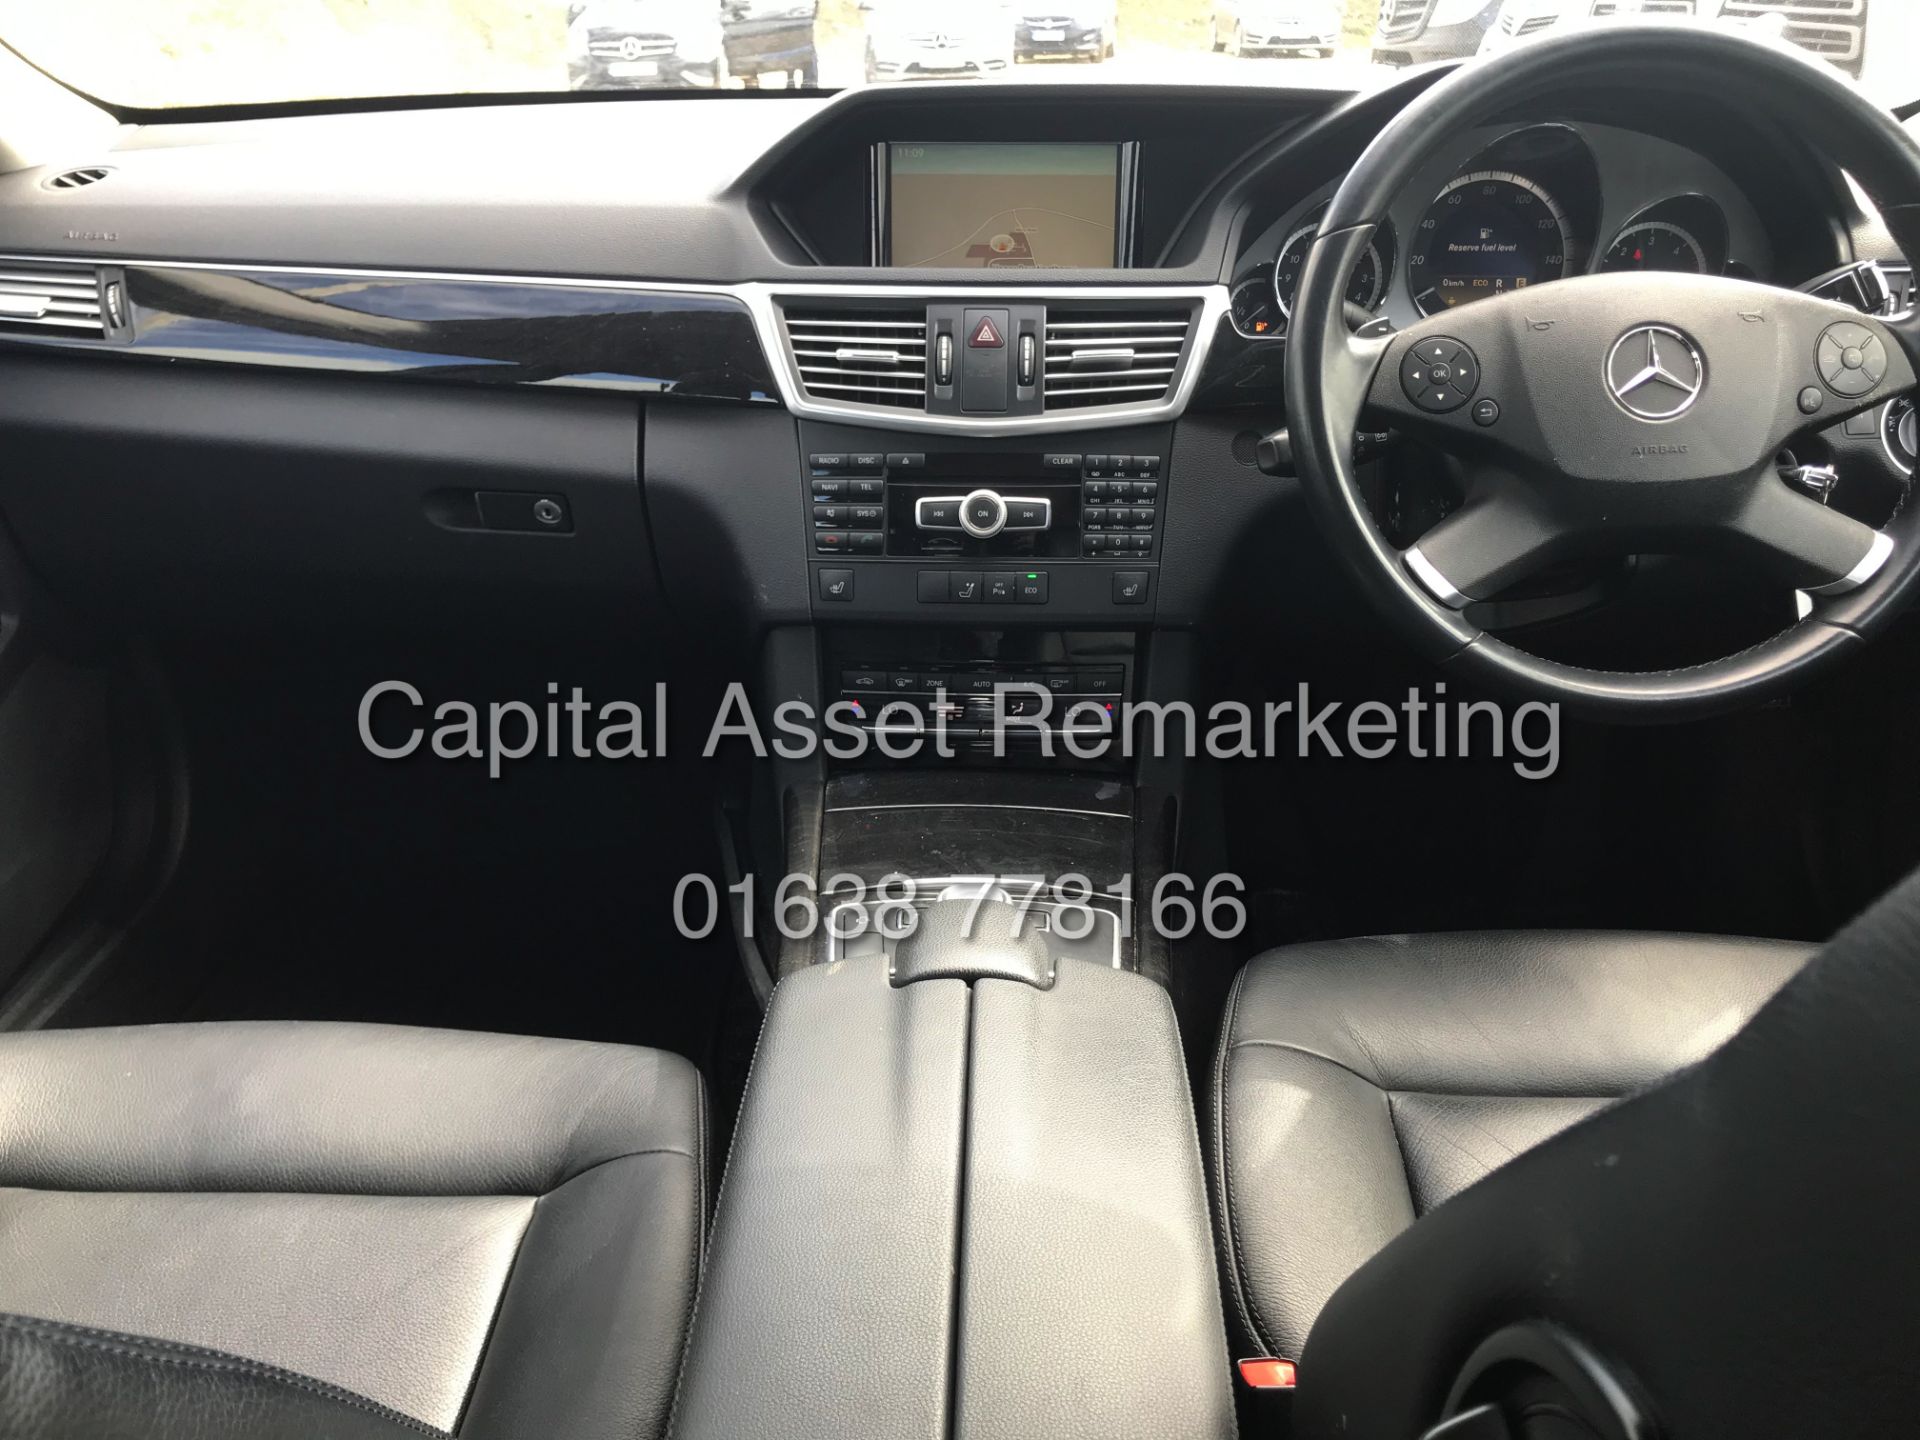 MERCEDES E220d 7G AUTO "EXECUTIVE - SPECIAL EQUIPMENT" SAT NAV - LEATHER - CLIMATE - CRUISE - Image 11 of 20